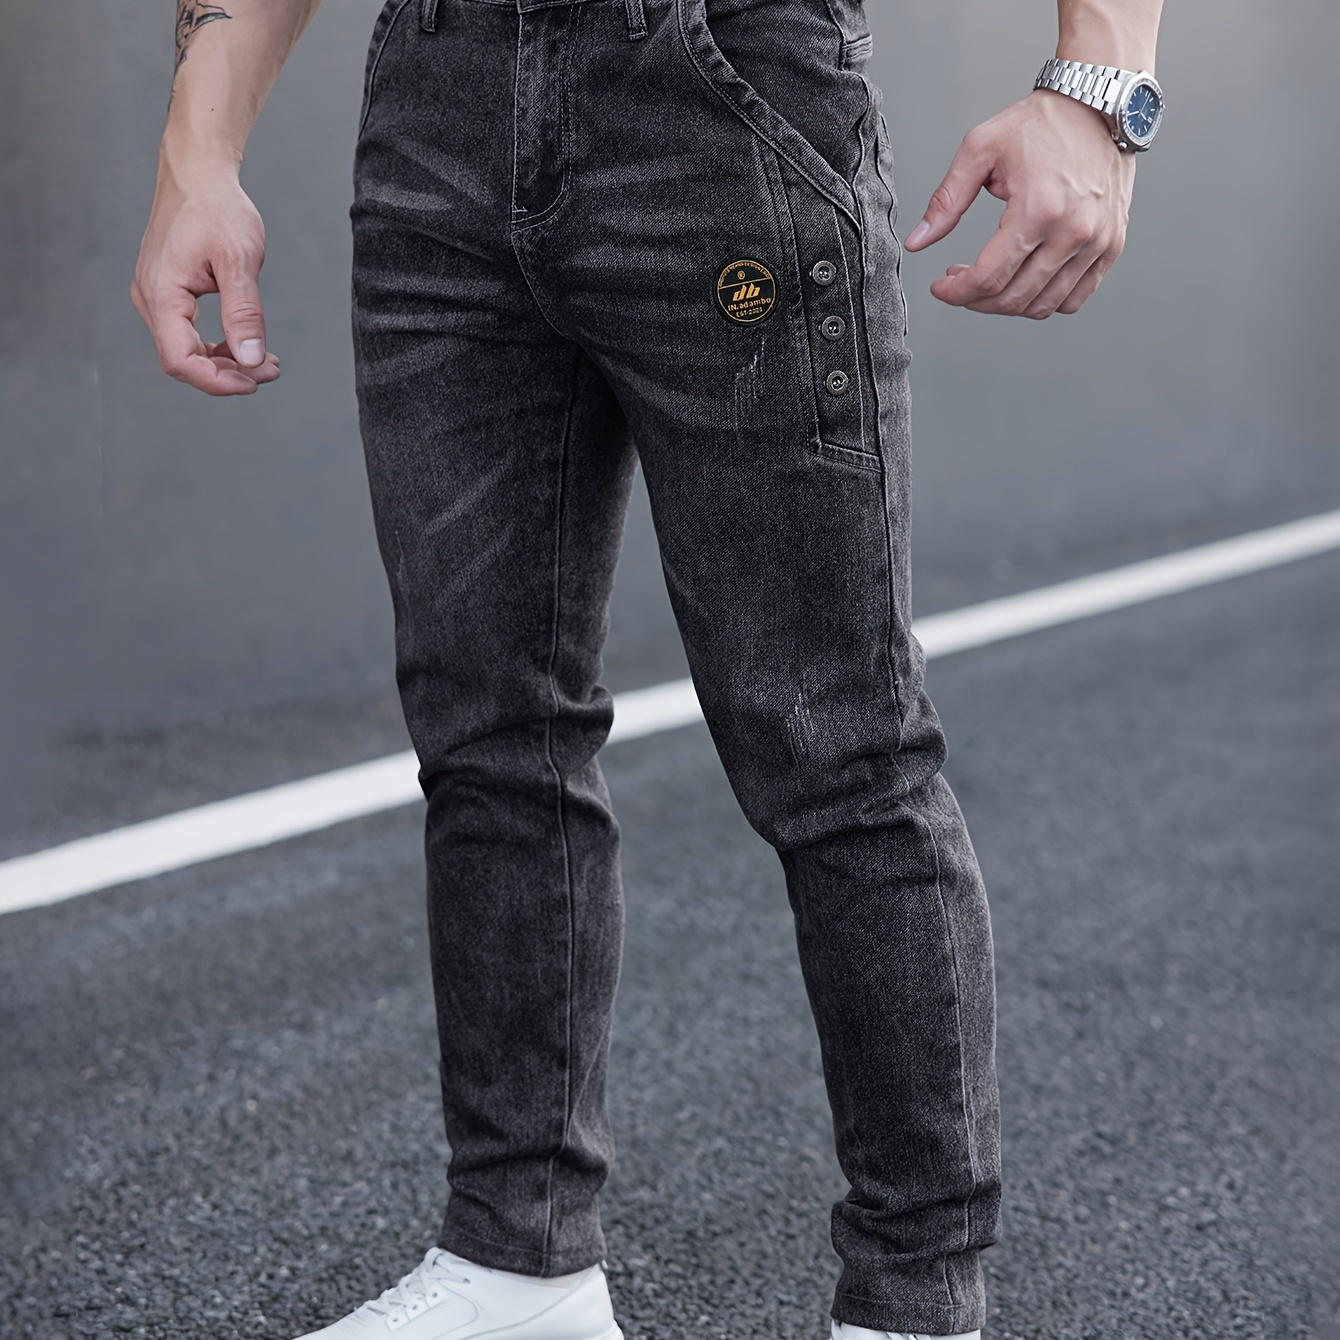 

Men's Casual Skinny Jeans, Chic Street Style Medium Stretch Jeans